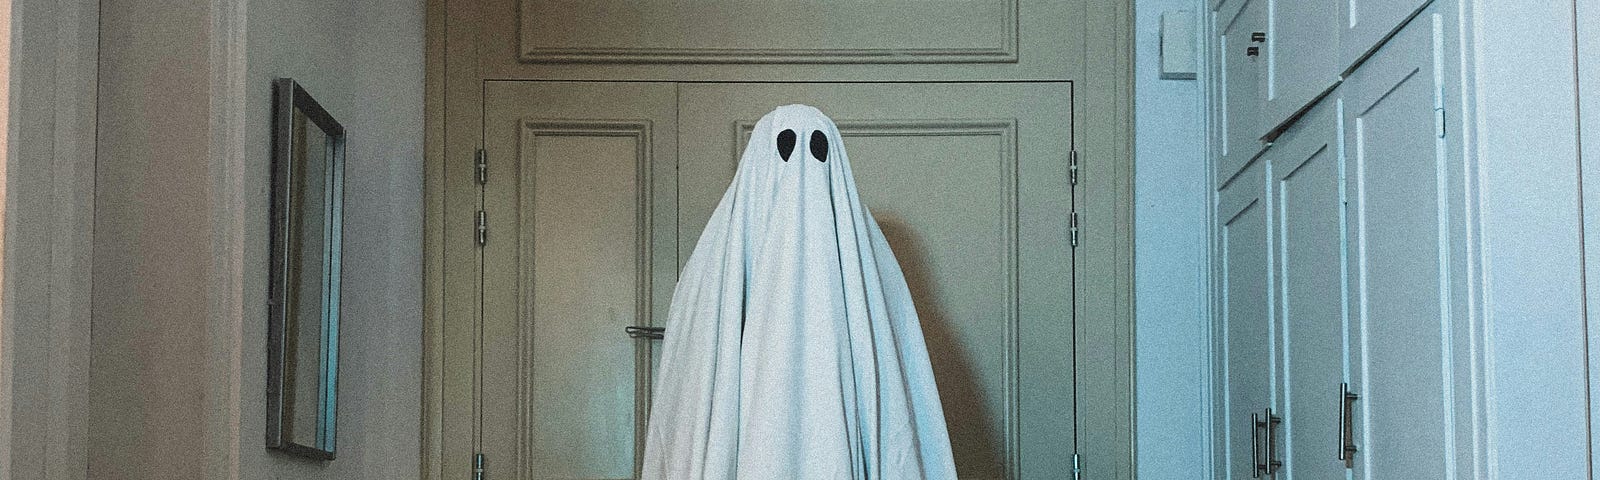 Costume made to look like a ghost in the middle of a room.